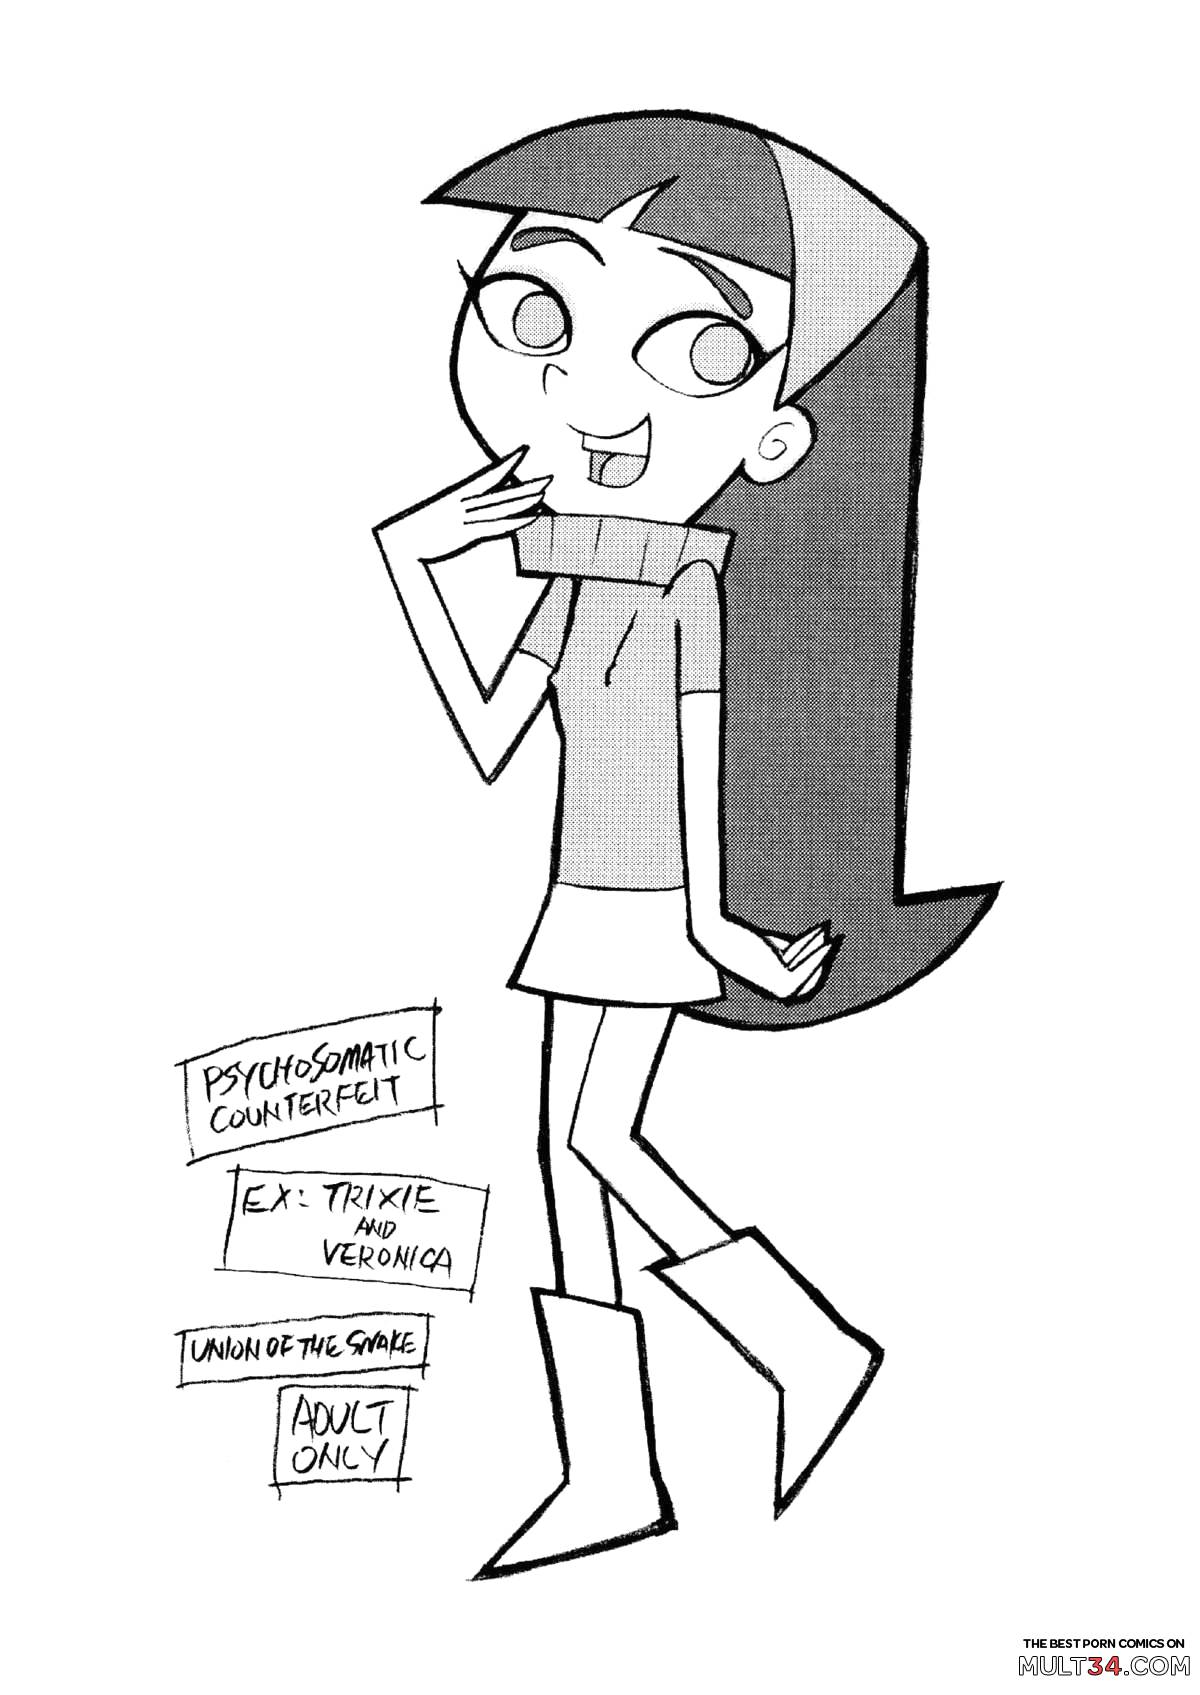 The Fairly Oddparents Trixie Veronica Porn - Psychosomatic Counterfeit Ex Trixie & Veronica hentai manga for free |  MULT34